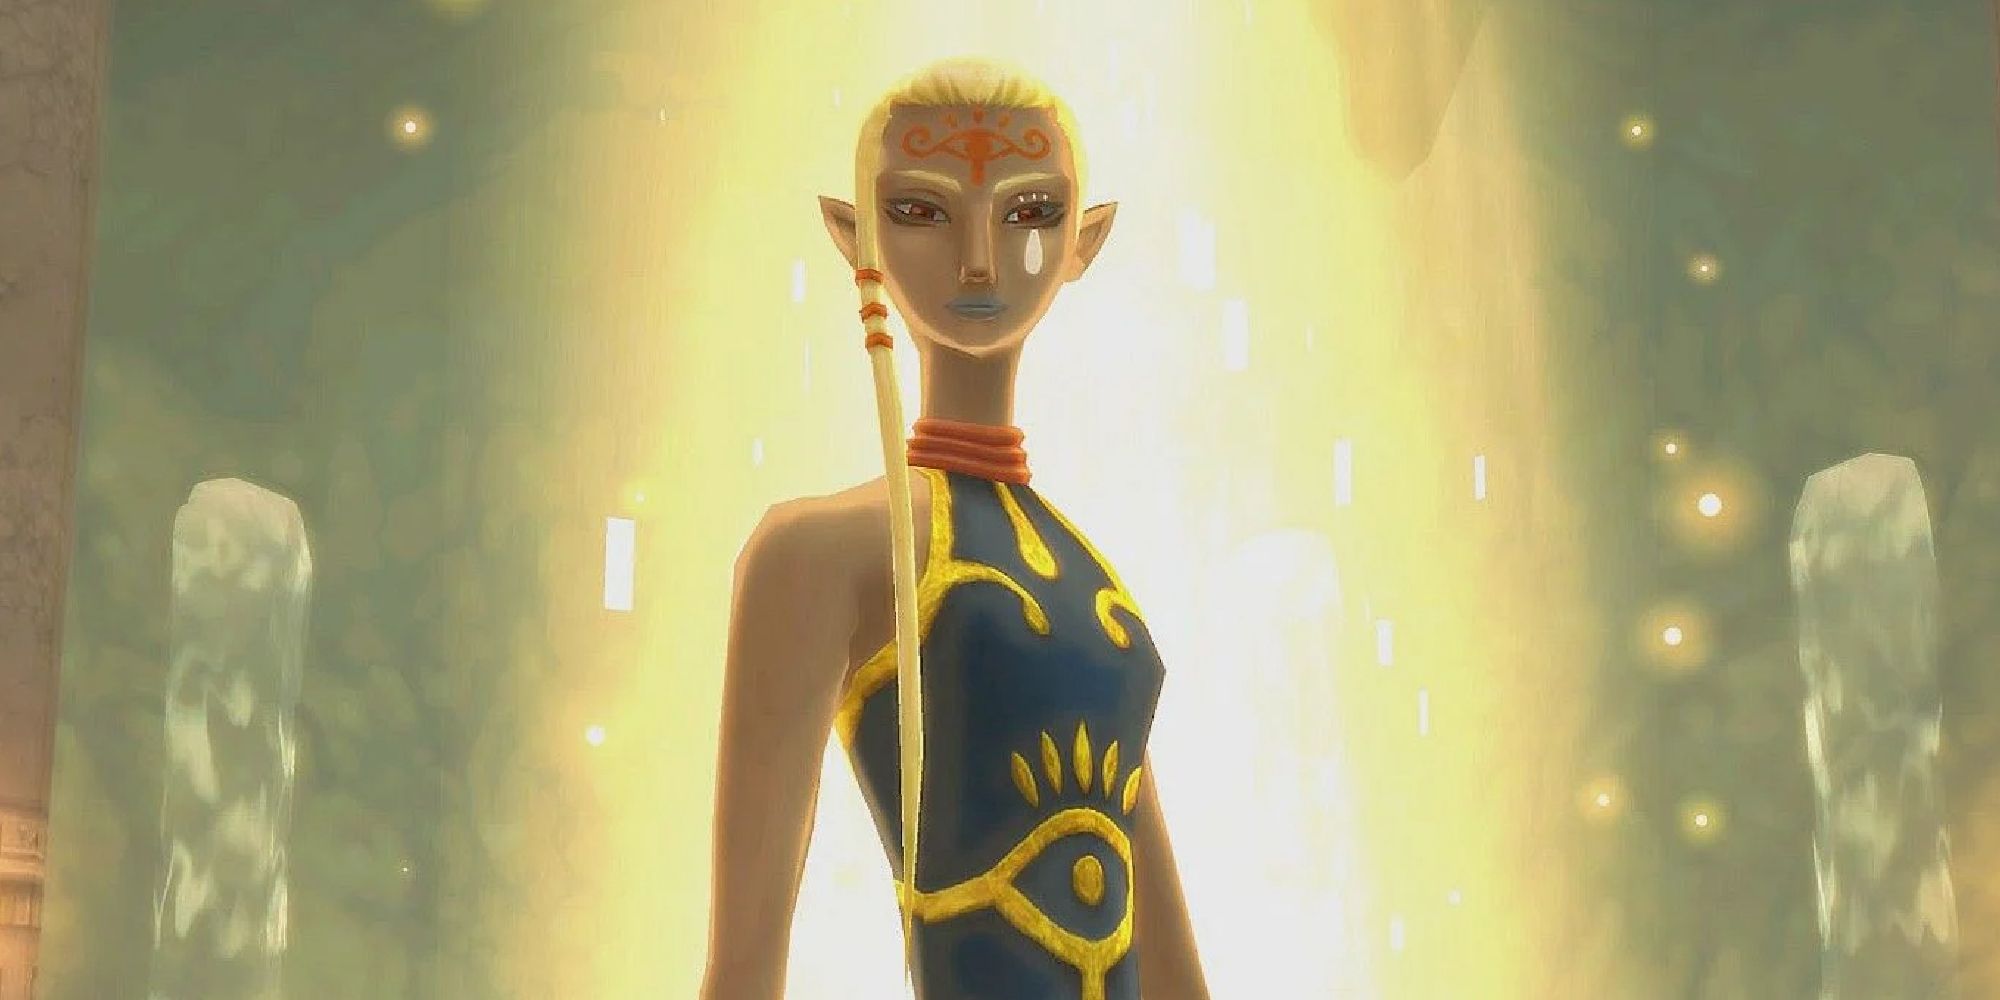 Young Impa appearing through a portal of light in Skyward Sword